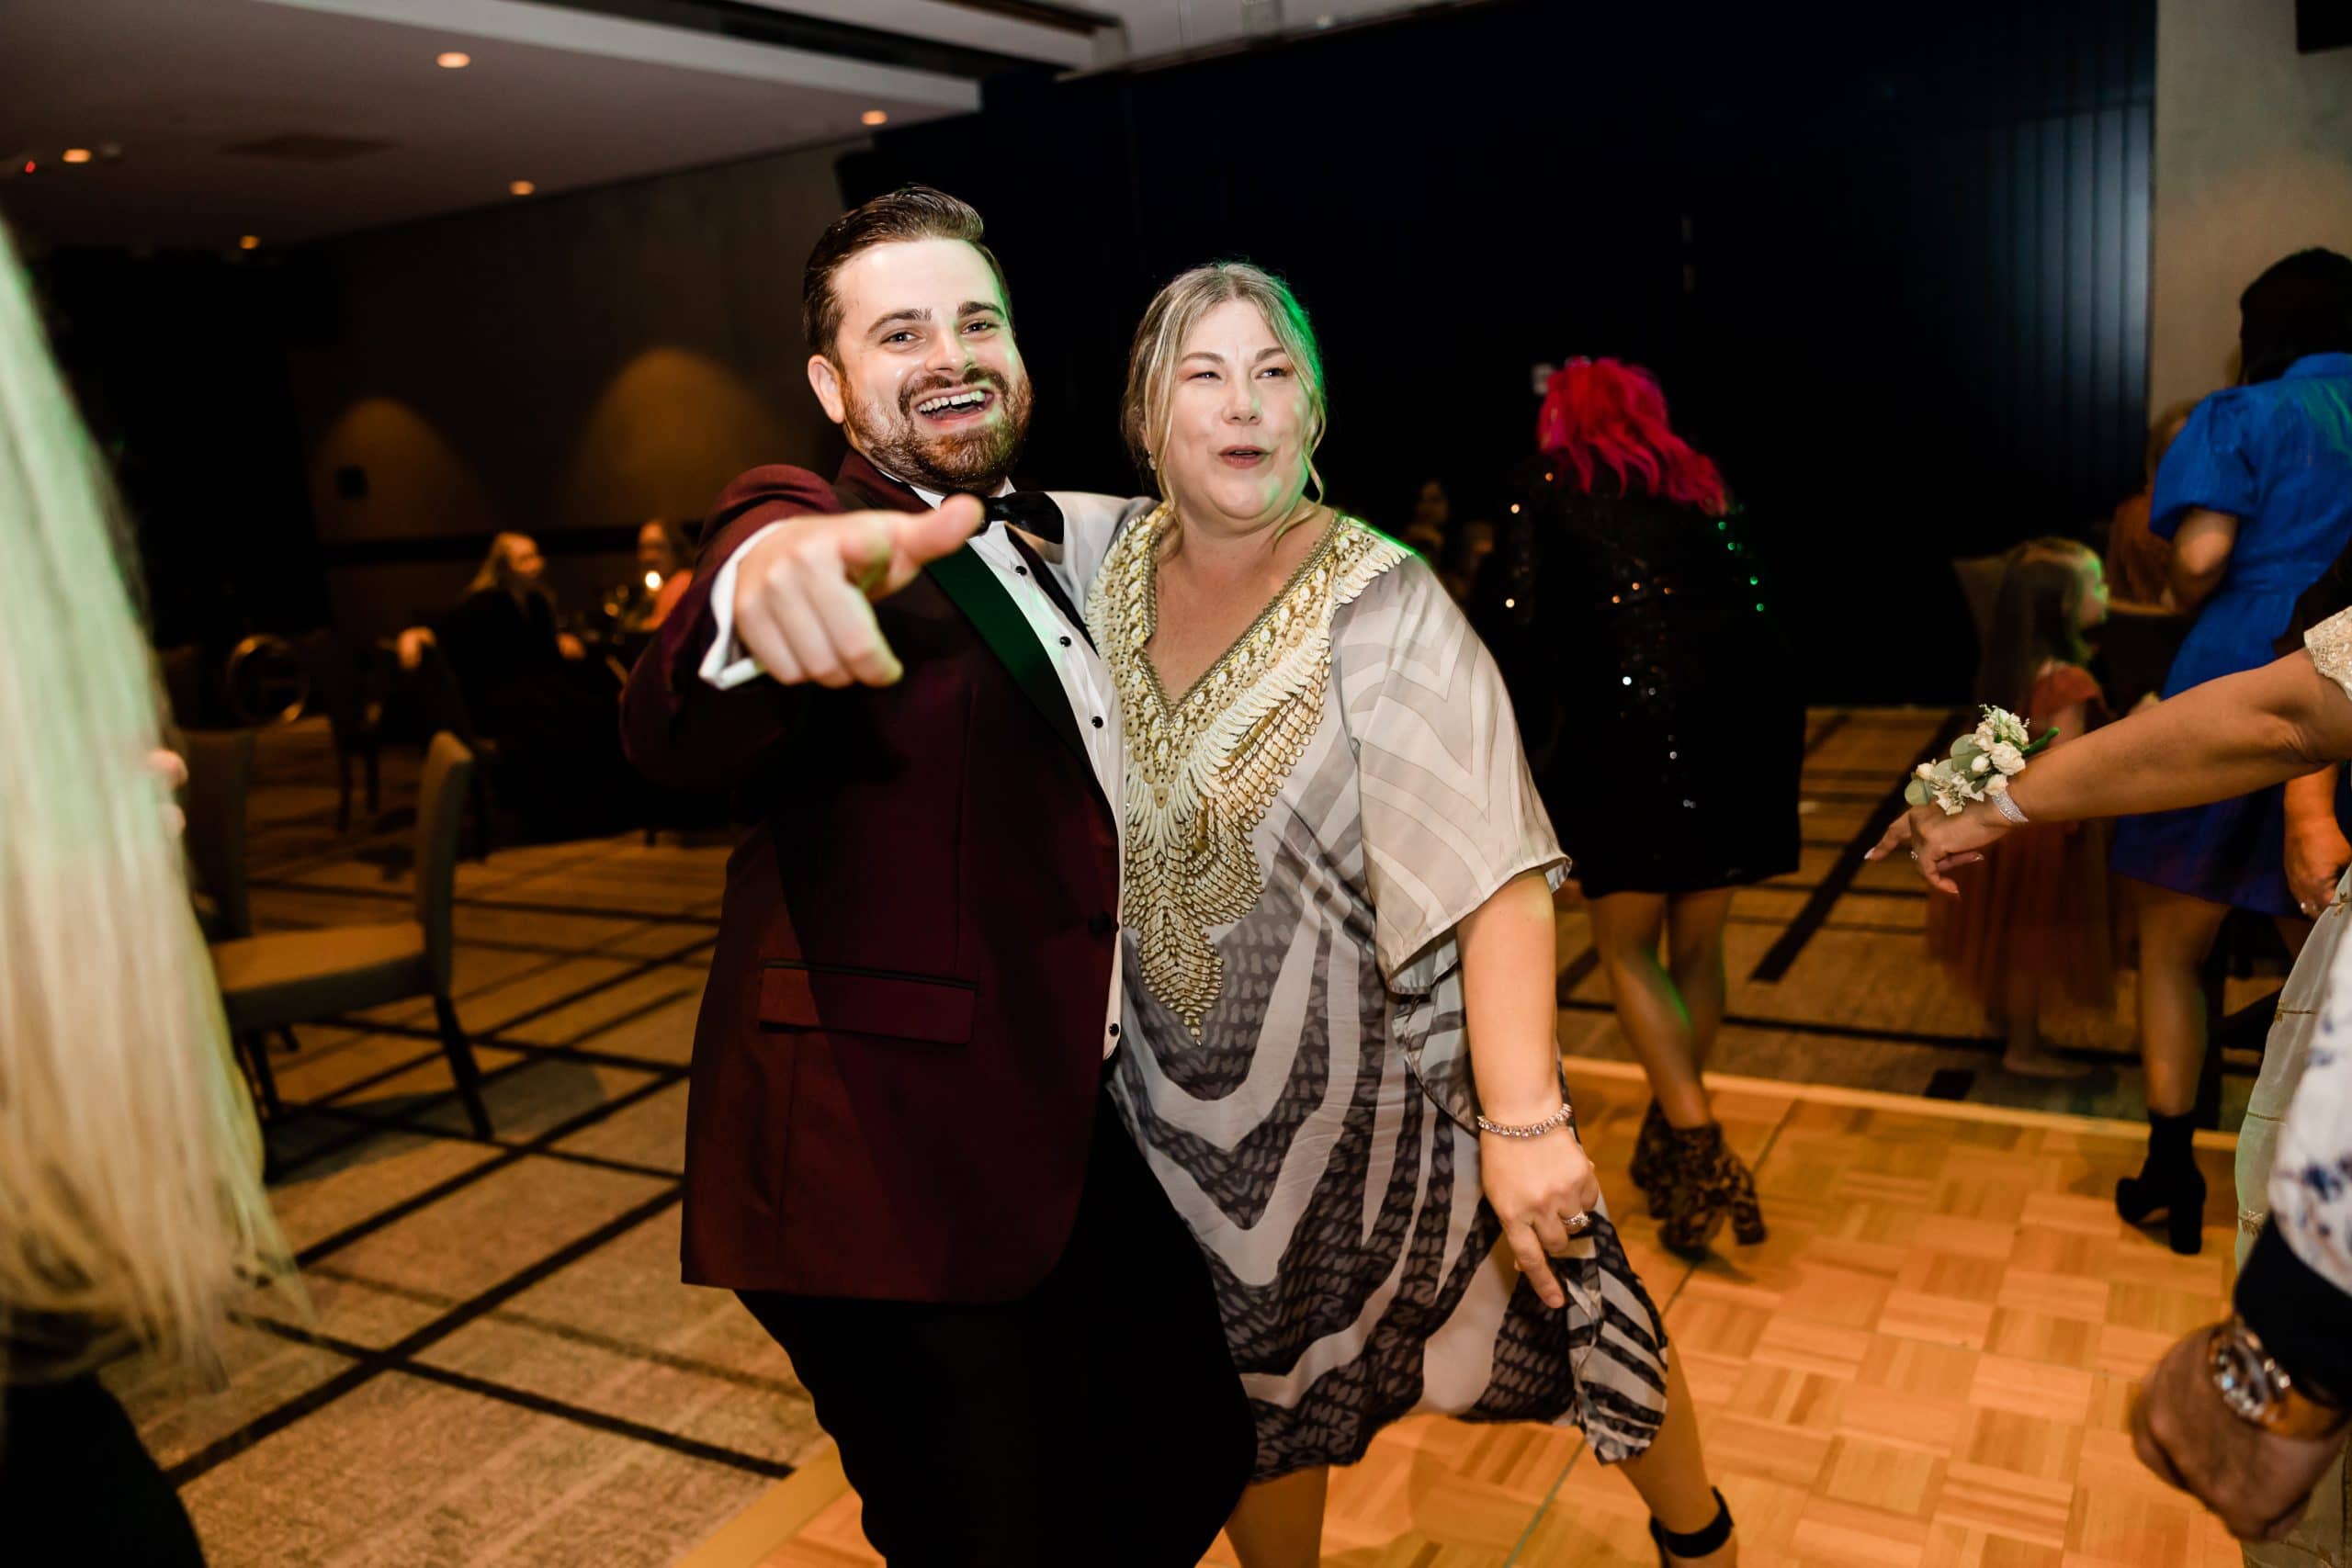 Nathan Cassar dancing with a lady while pointing to the camera